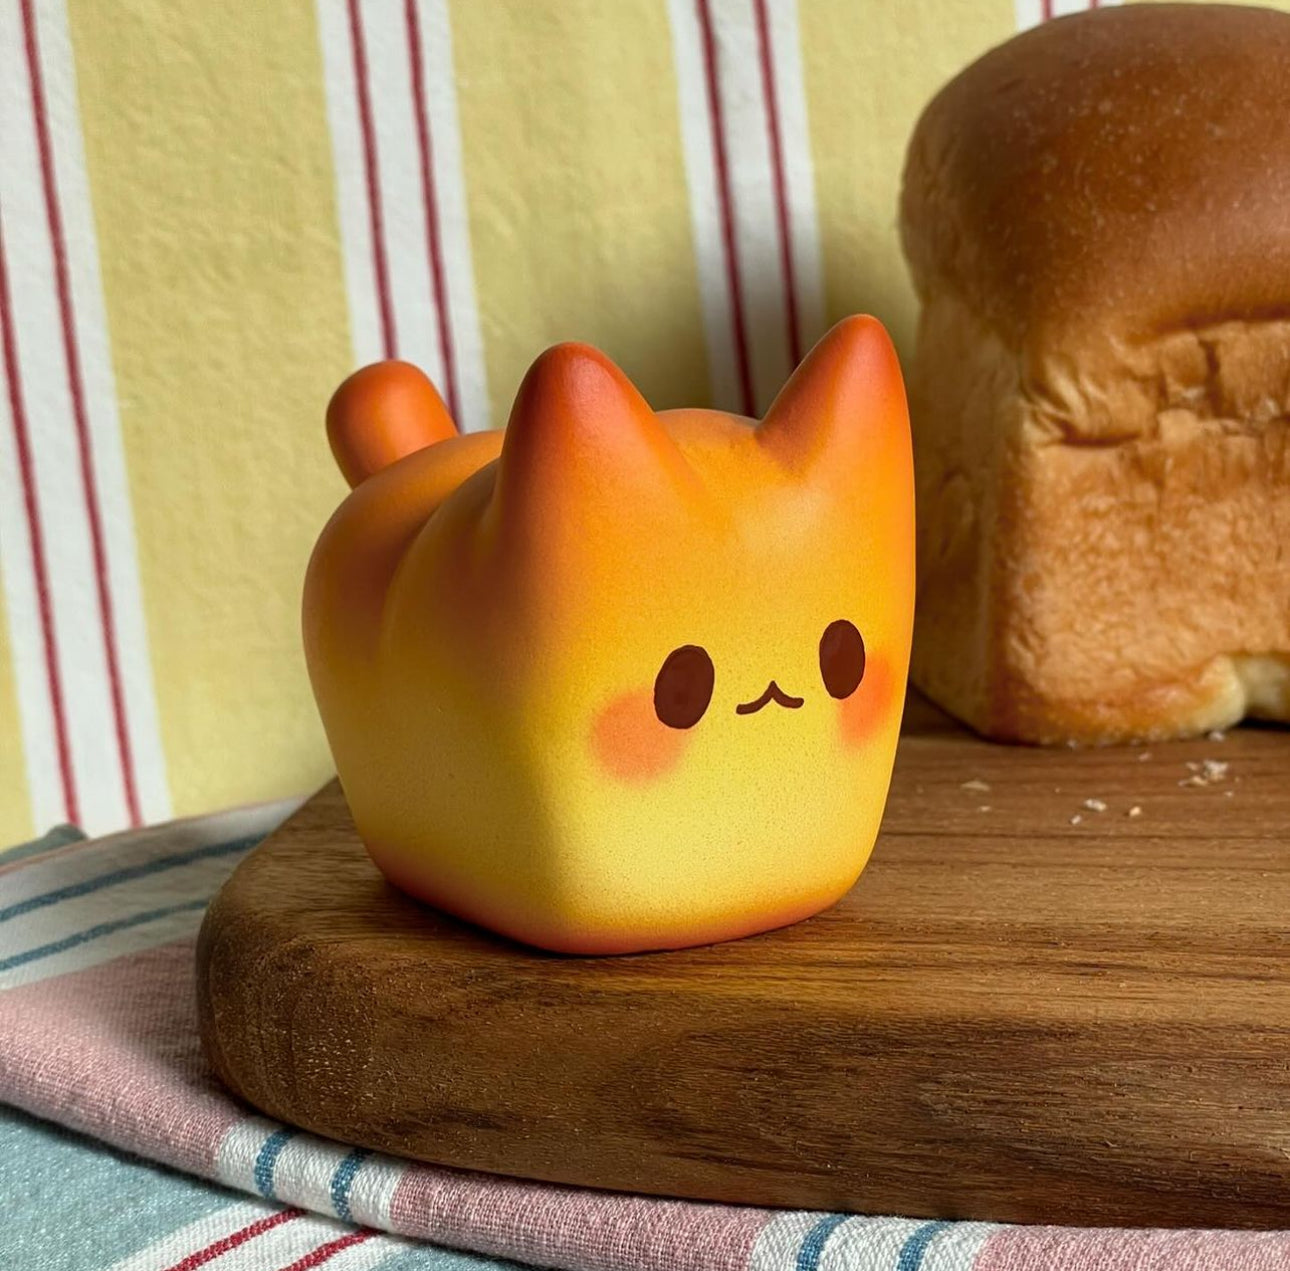 Bread Cat and Baby Bread set by Rato Kim - Preorder